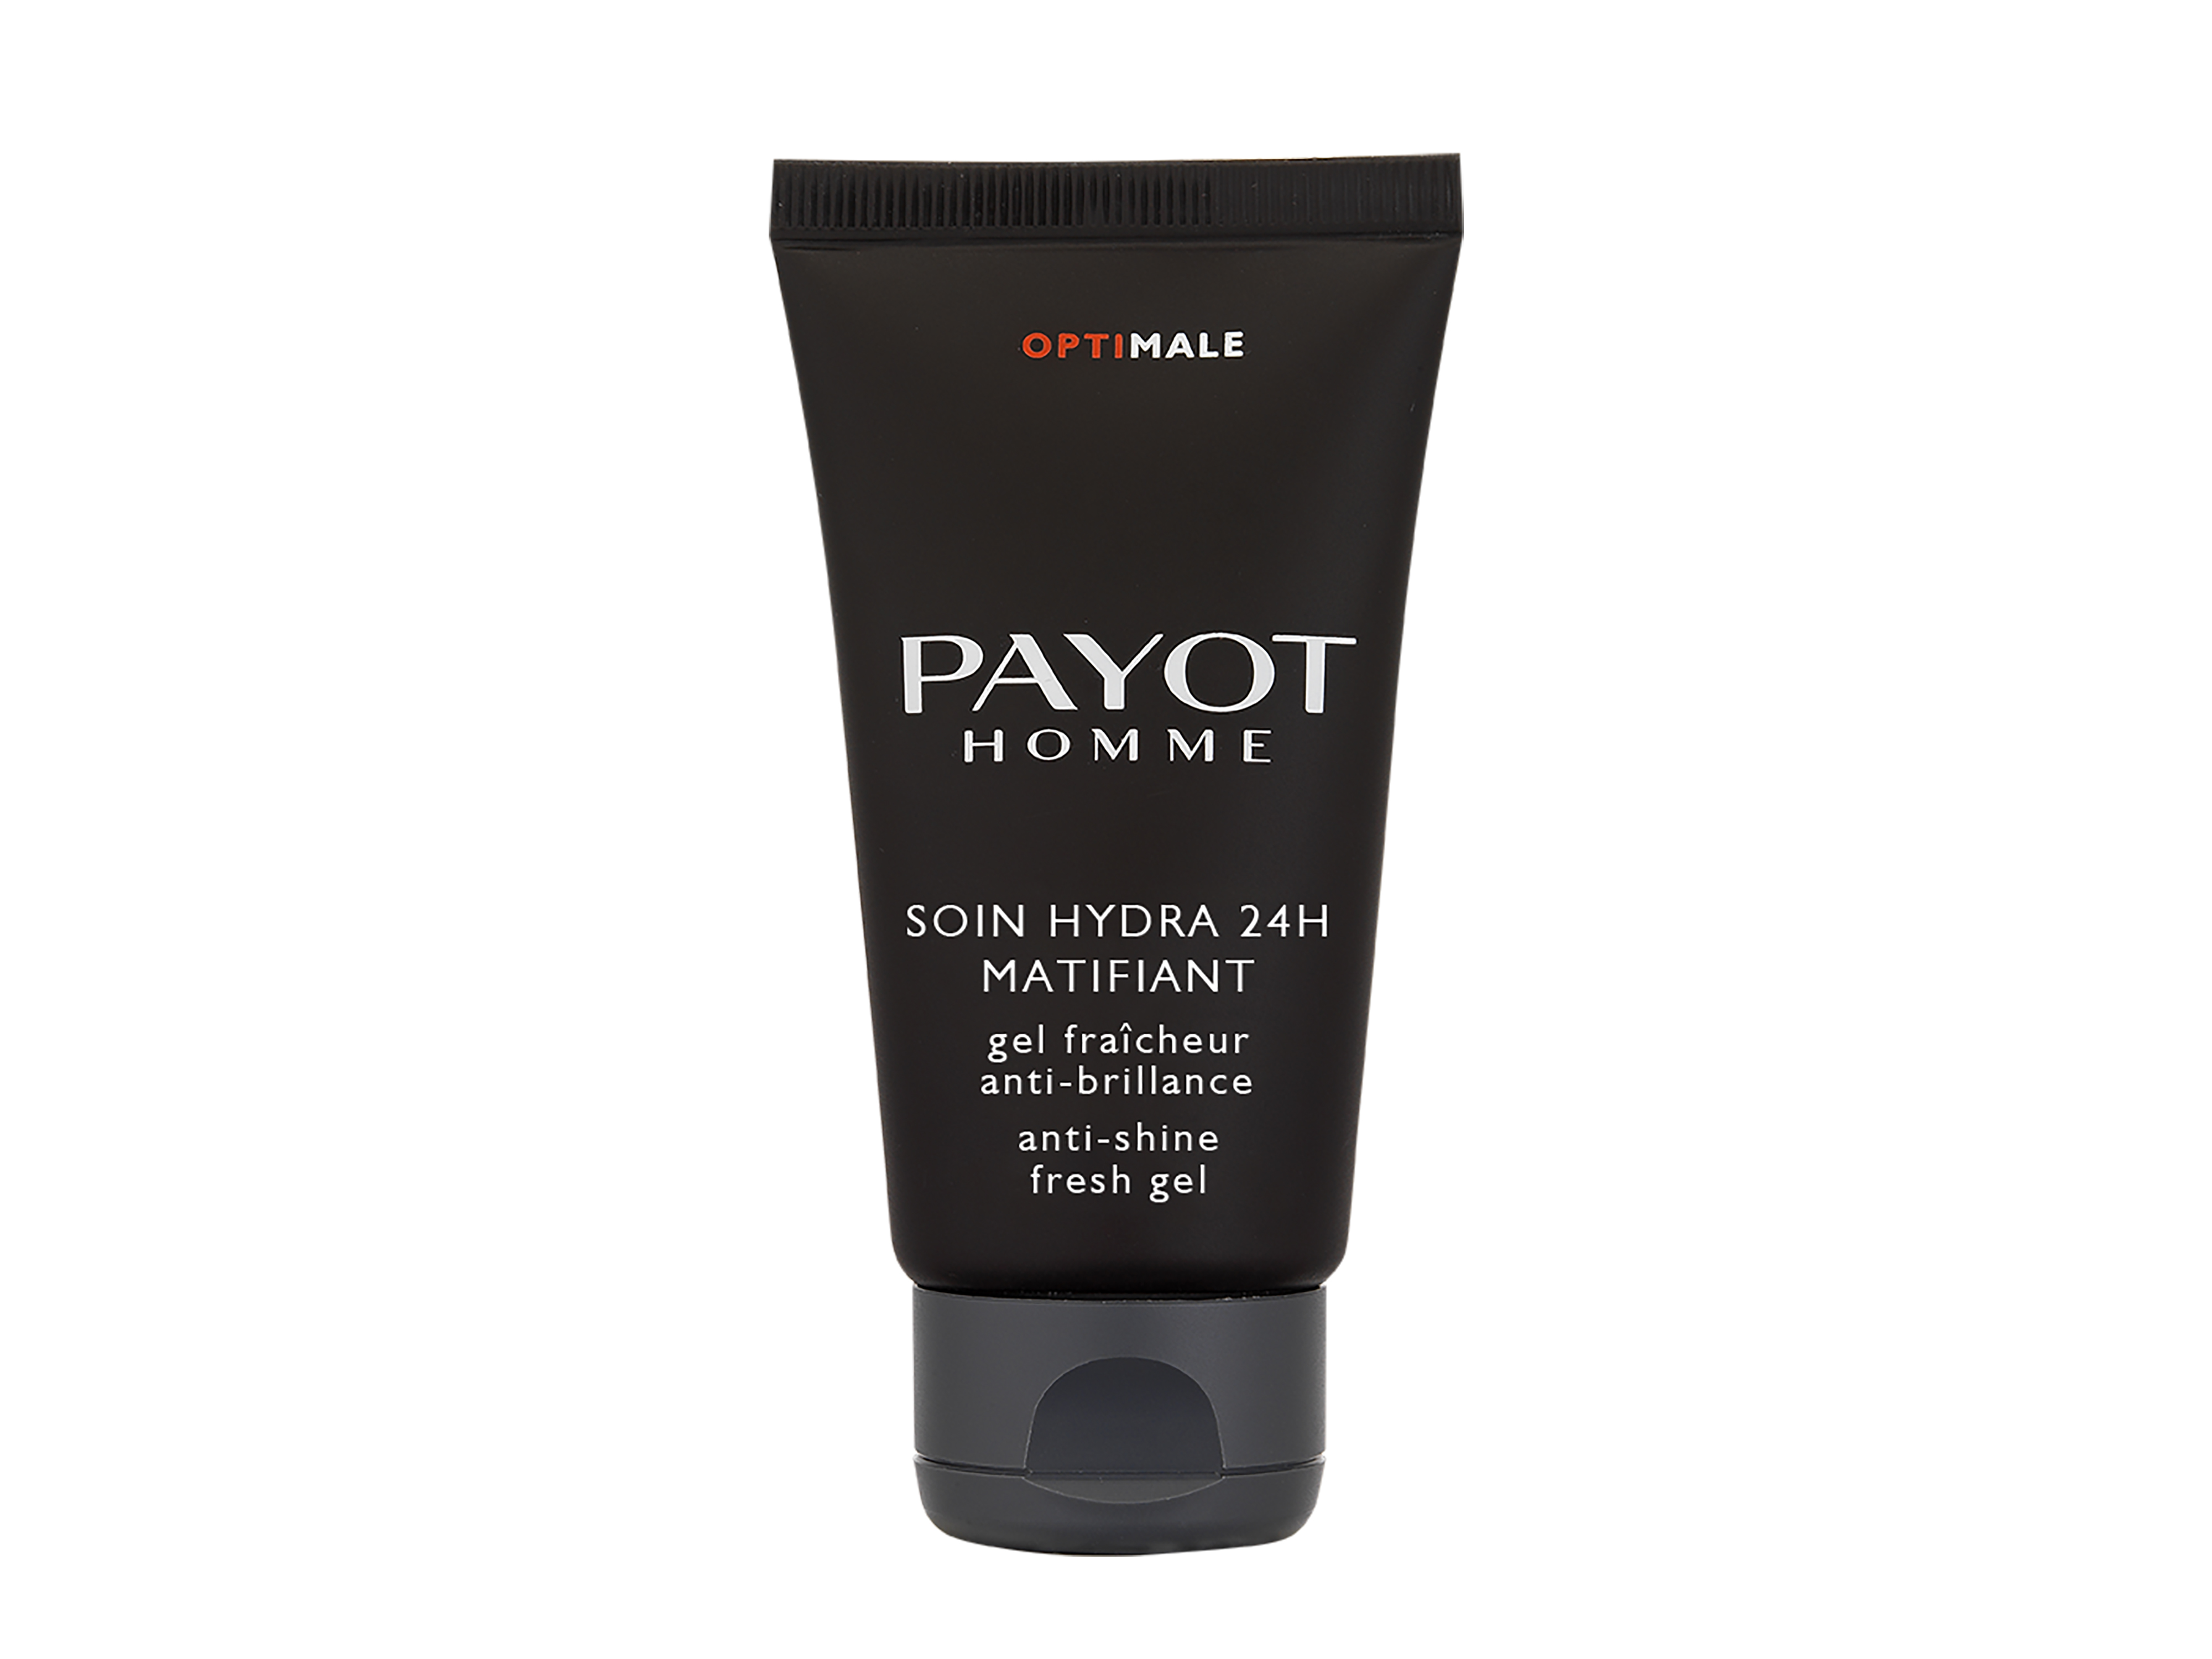 Payot Homme Optimale Hydra 24H Matifiant, 50 ml